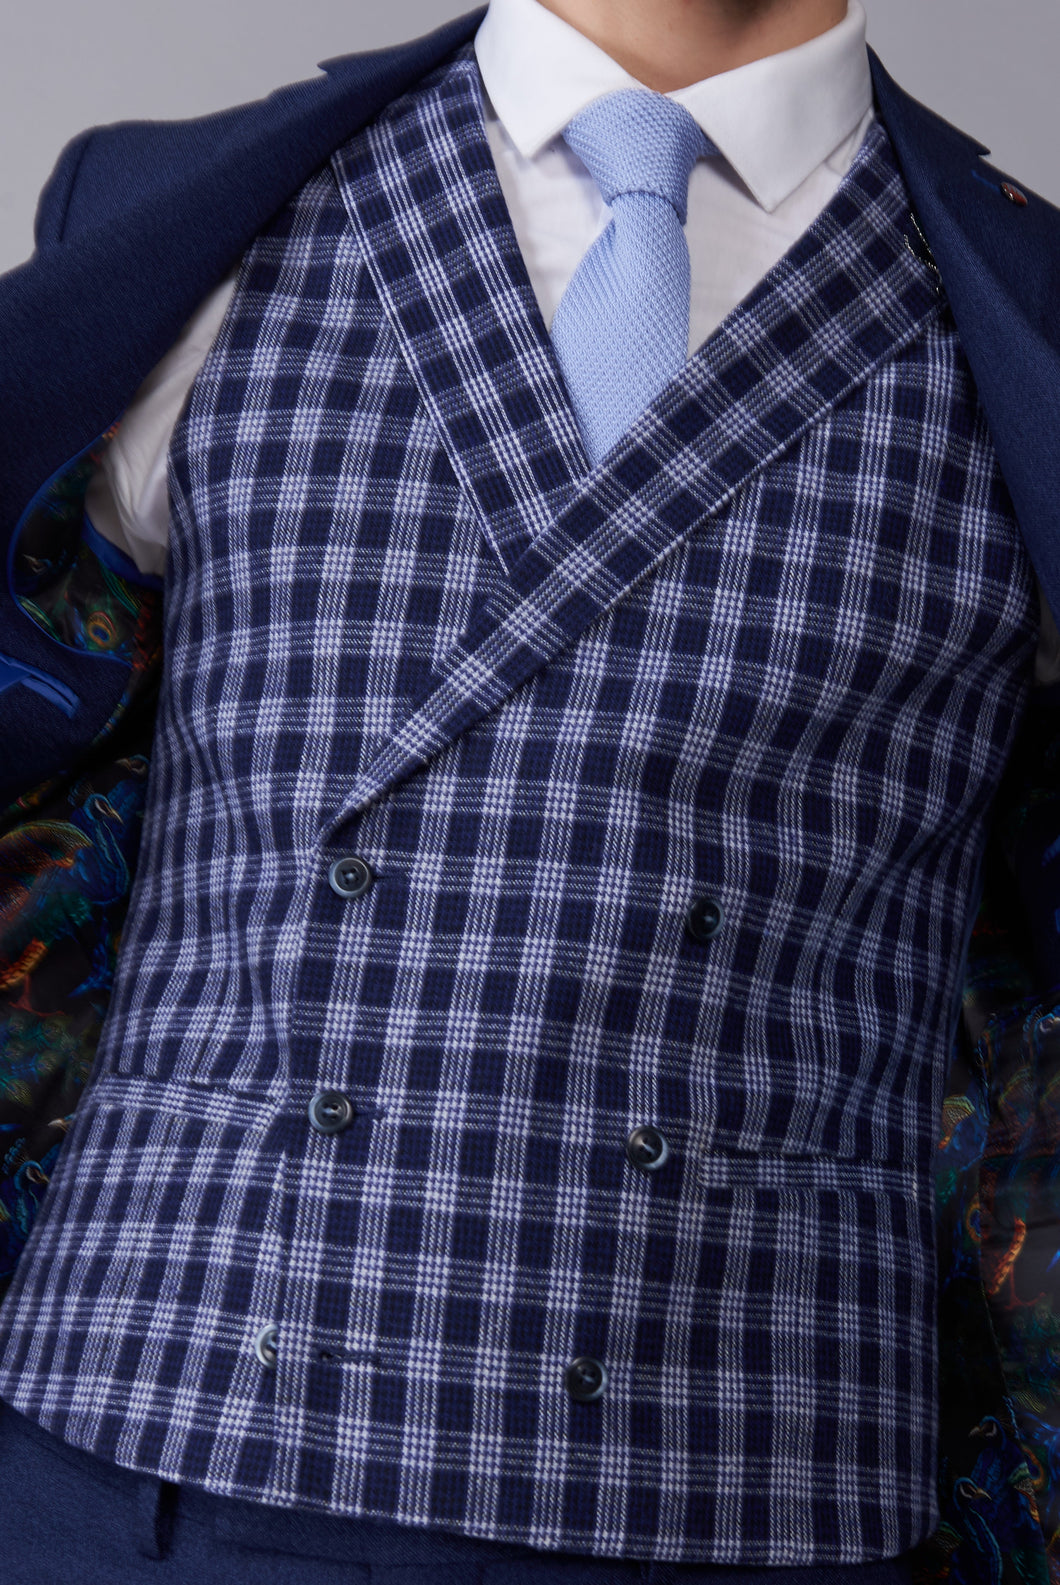 Thomas Blue & White Check Double Breasted Waistcoat RRP £59